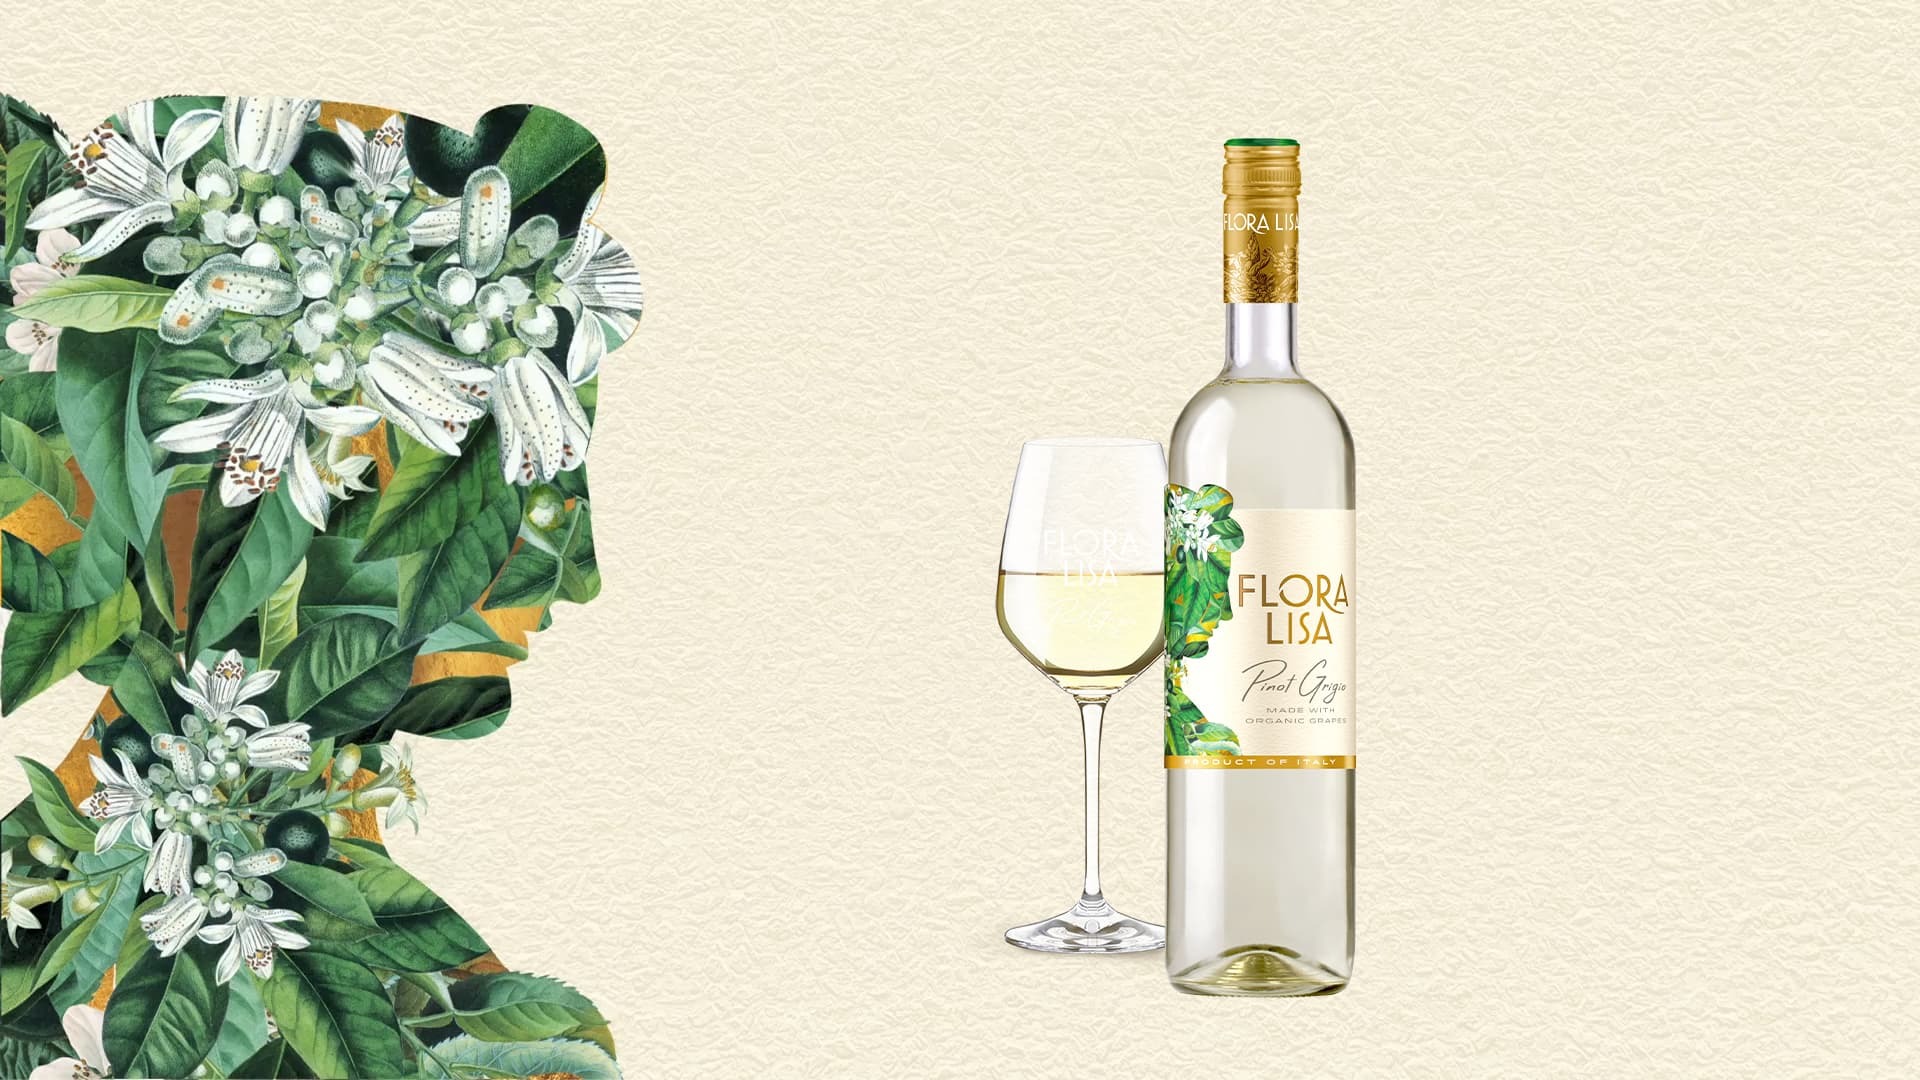 Robilant Defies Category Cliches with New Flora Lisa Pinot Grigio Design